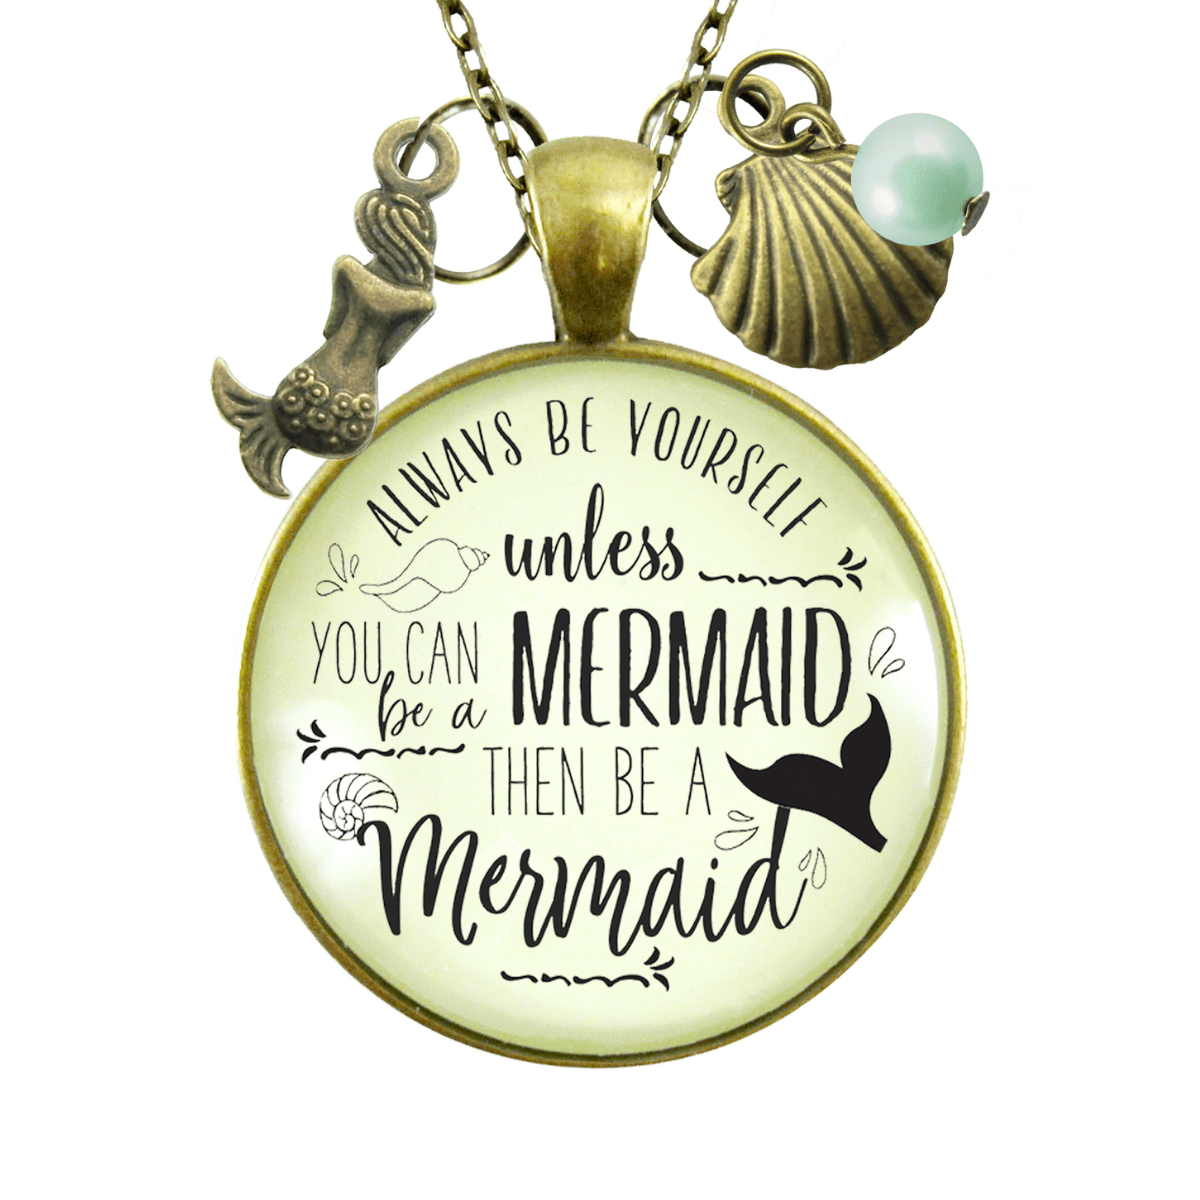 Gutsy Goodness Mermaid Necklace Always Be Yourself Unless Ocean Tropical Jewelry Beach Charms - Gutsy Goodness Handmade Jewelry;Mermaid Necklace Always Be Yourself Unless Ocean Tropical Jewelry Beach Charms - Gutsy Goodness Handmade Jewelry Gifts